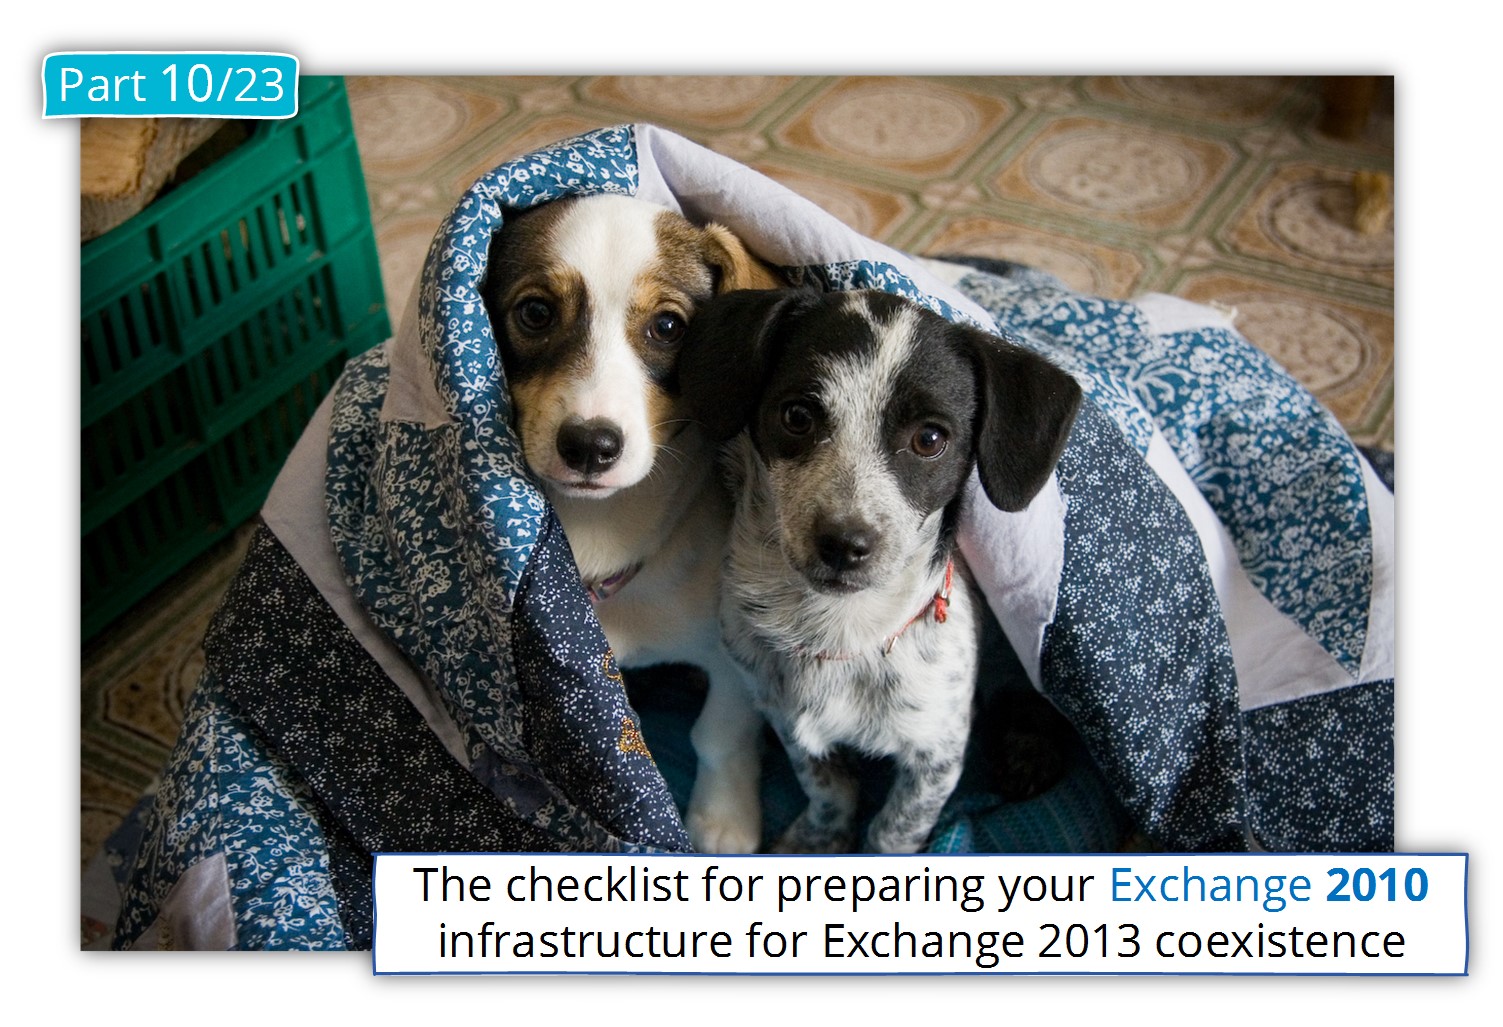 The checklist for preparing your Exchange 2010 infrastructure for Exchange 2013 coexistence